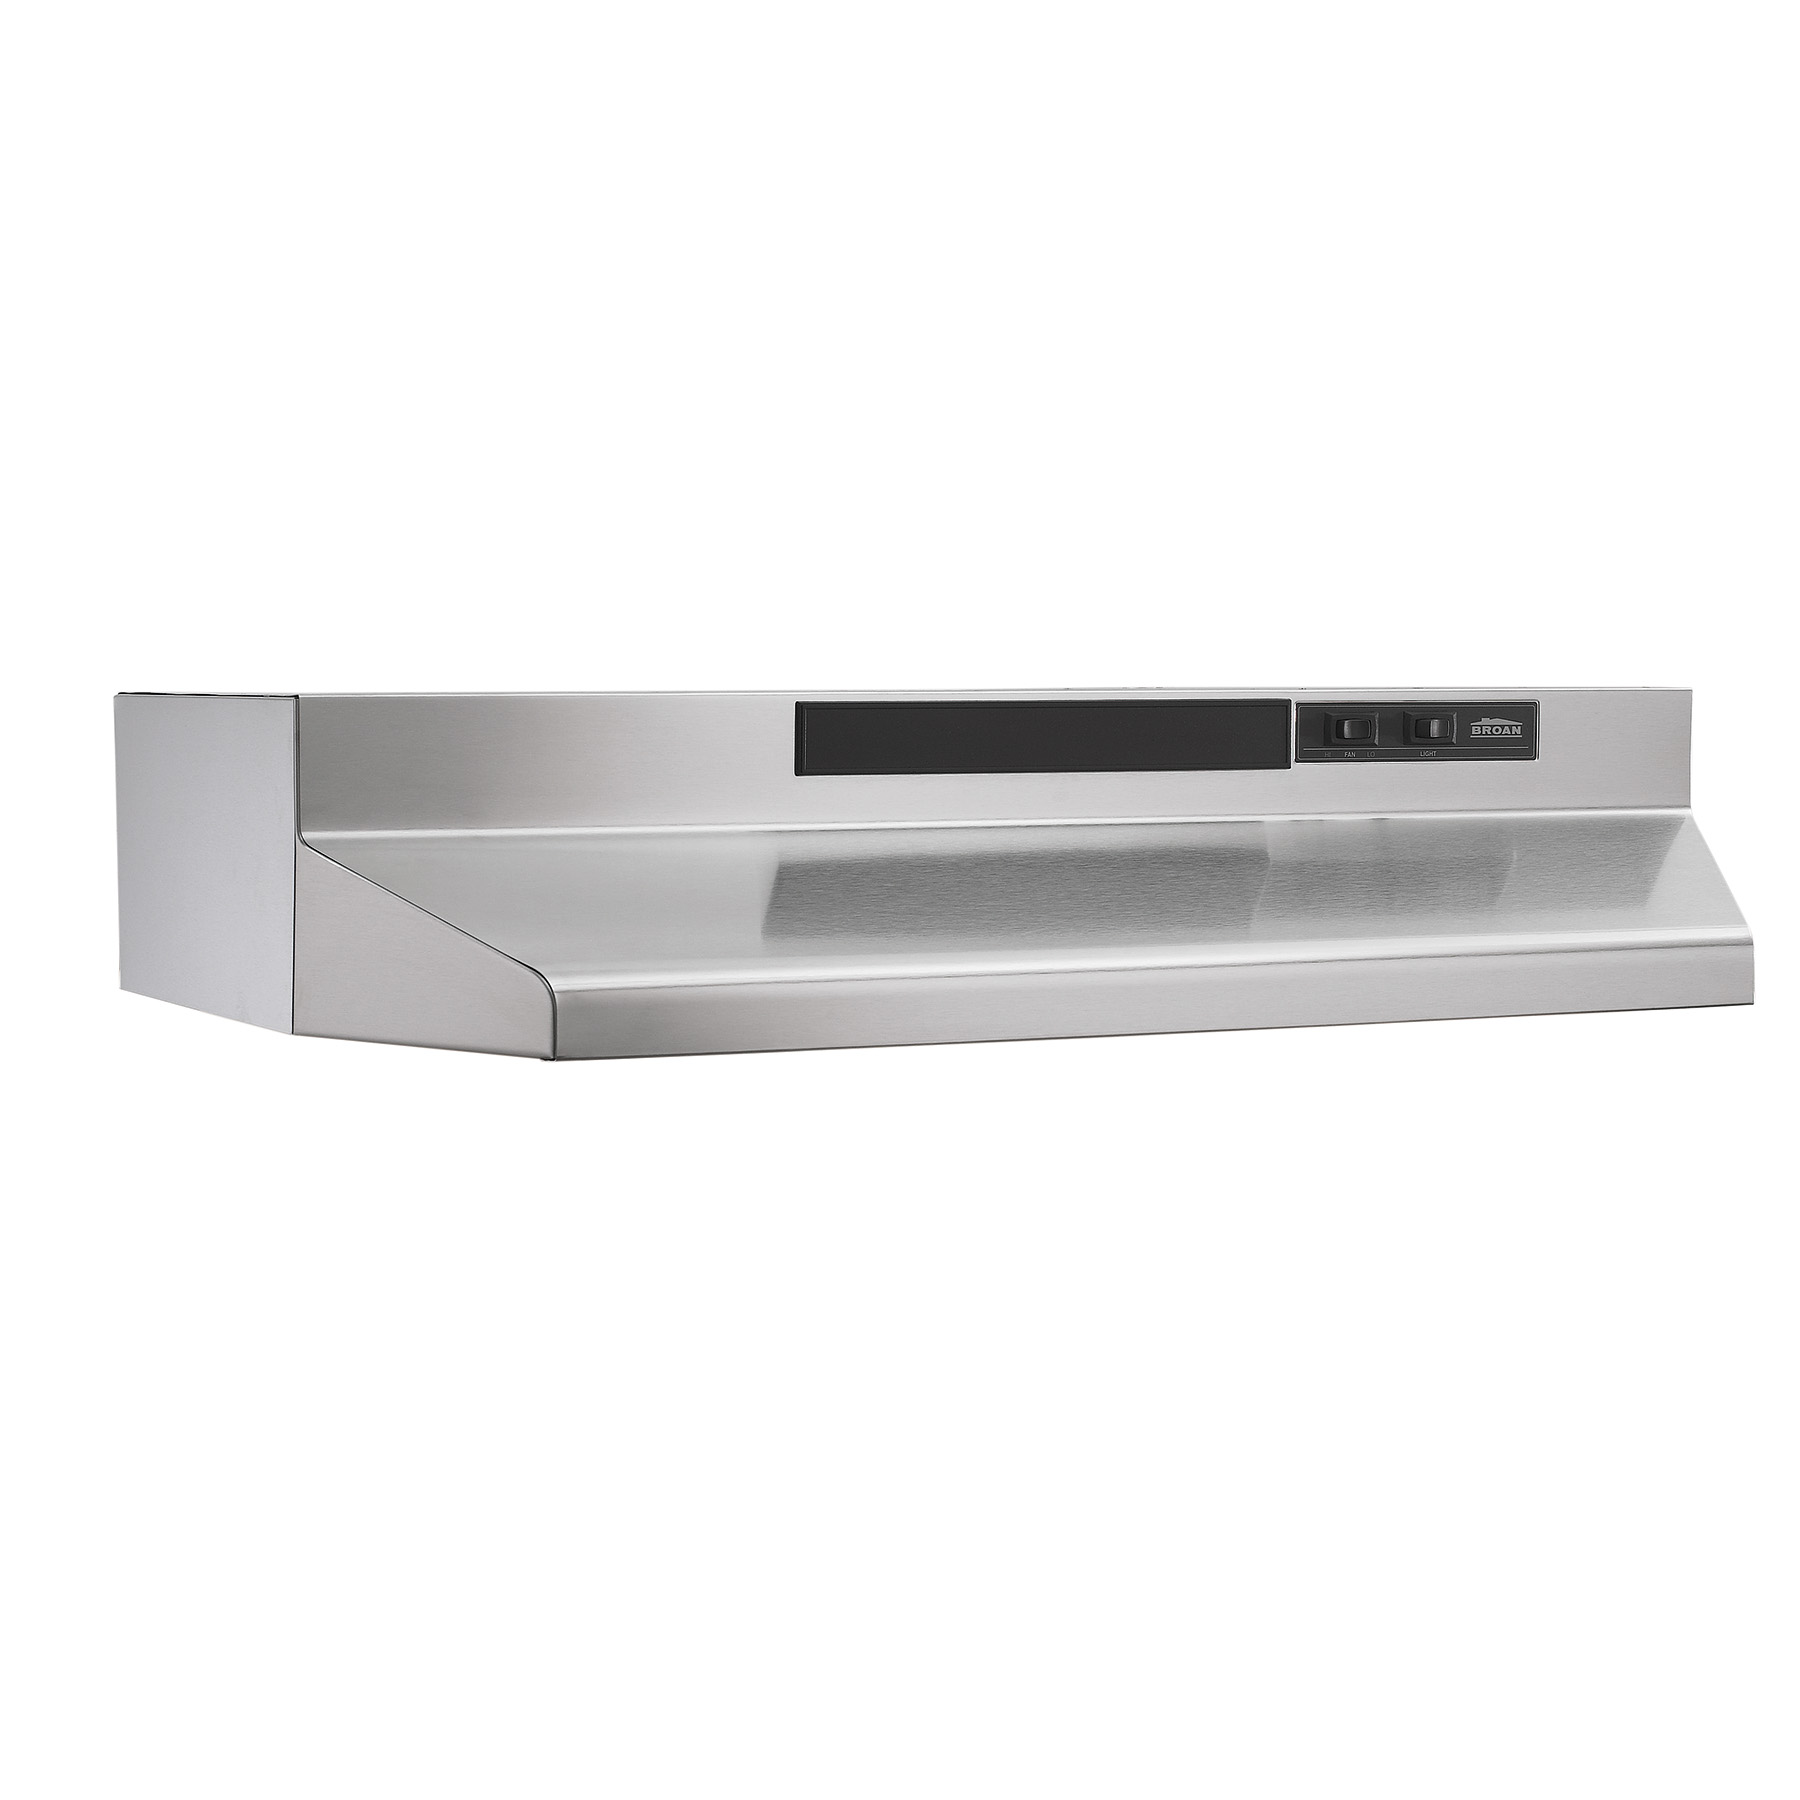 Broan F404211 42" 2-Speed Convertible Range Hood White for sale online 